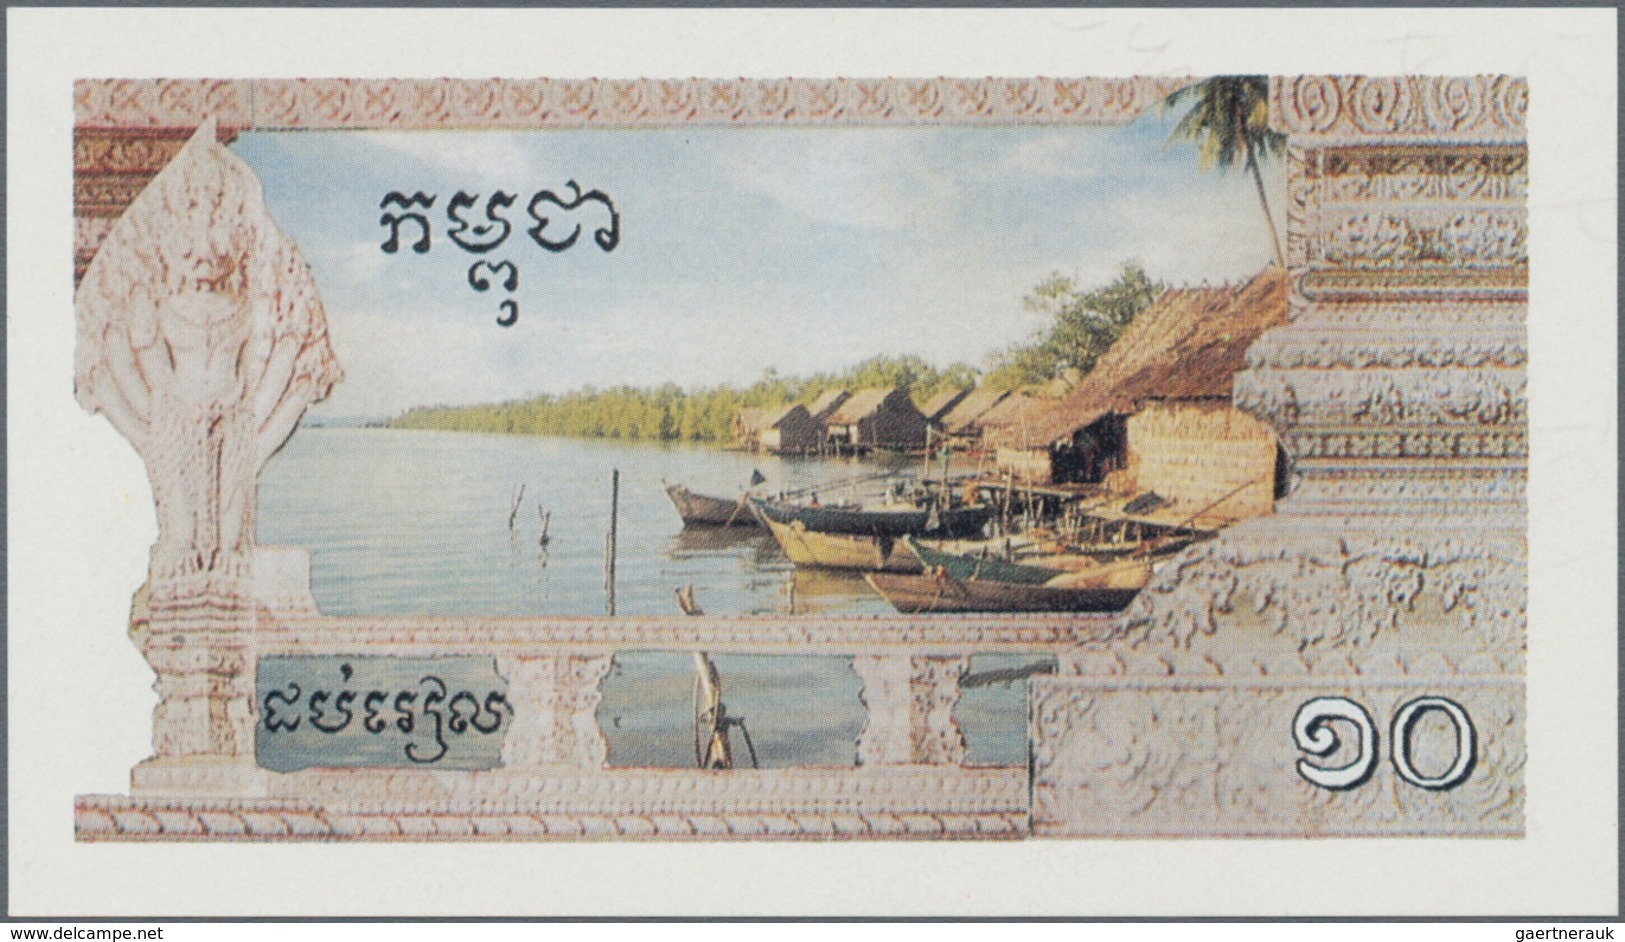 Cambodia / Kambodscha: complete set of 5 Khmer Rouge forgeries from 1 to 100 Riels P. R1-R5 in condi